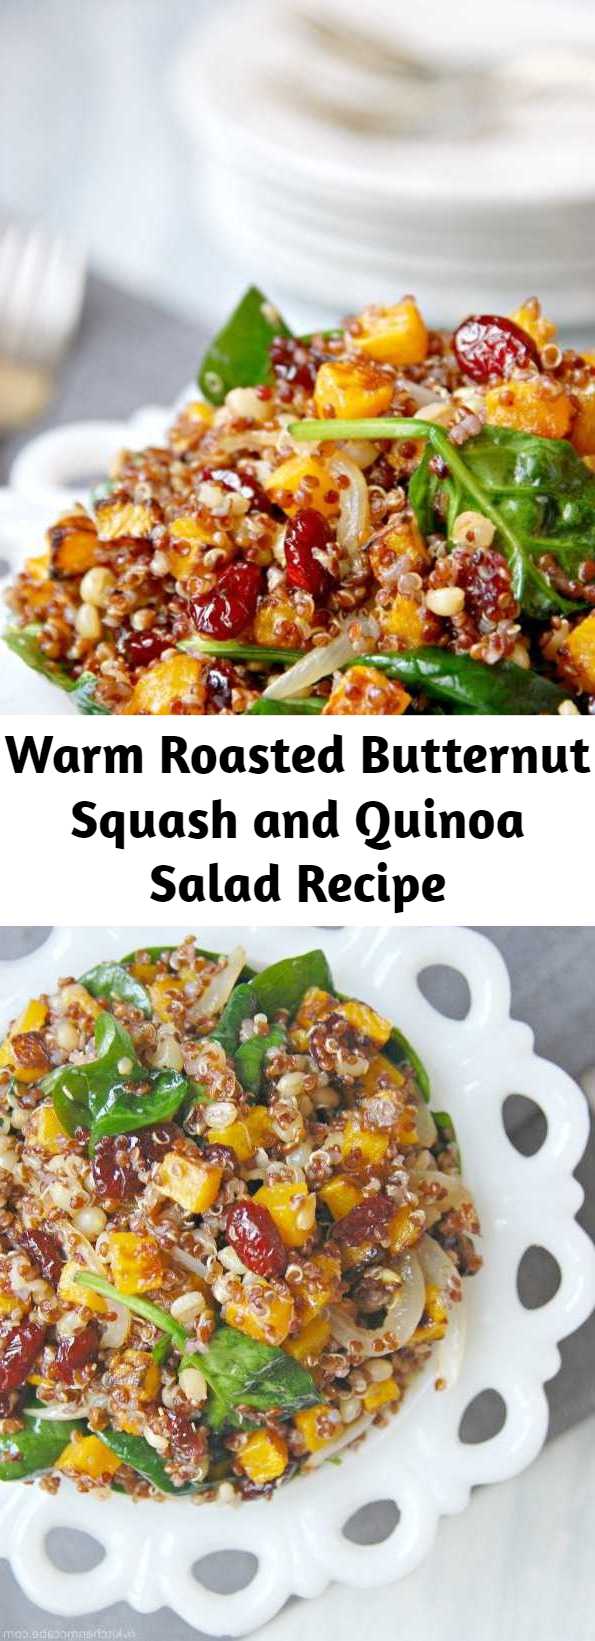 Warm Roasted Butternut Squash and Quinoa Salad Recipe - This lovely Vegan quinoa salad is so full of beautiful color. It’s full of  earthy grains, a subtly tangy dressing, and sweet squash and cranberries. So perfect for the cold, drab winter. Brightly colored foods just make me so happy!